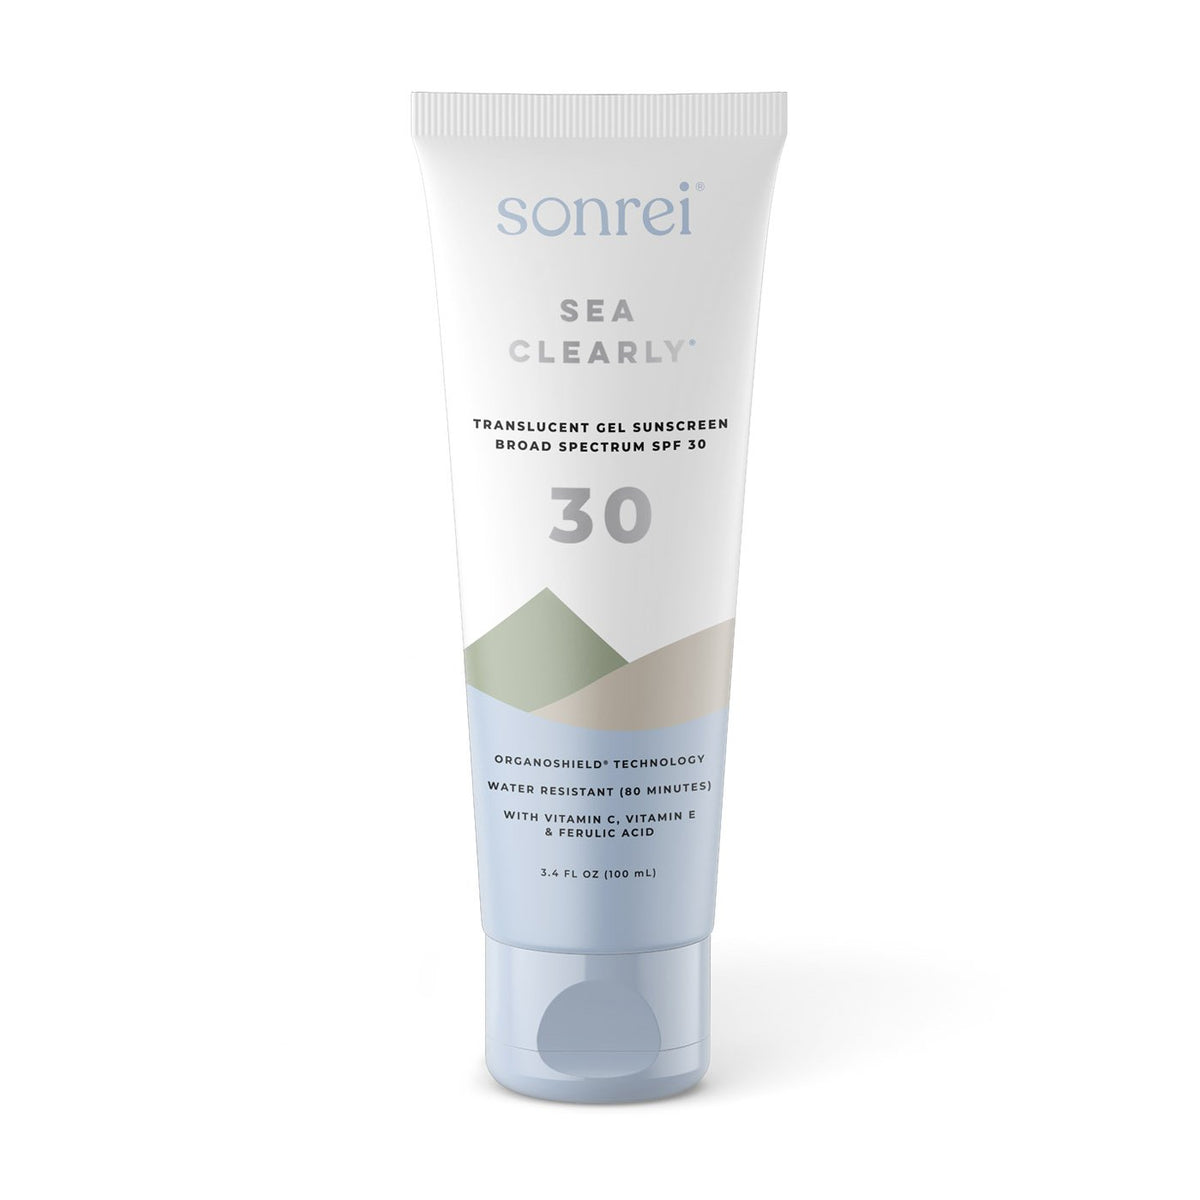 Sea Clearly Translucent Gel Sunscreen Broad Spectrum SPF 30